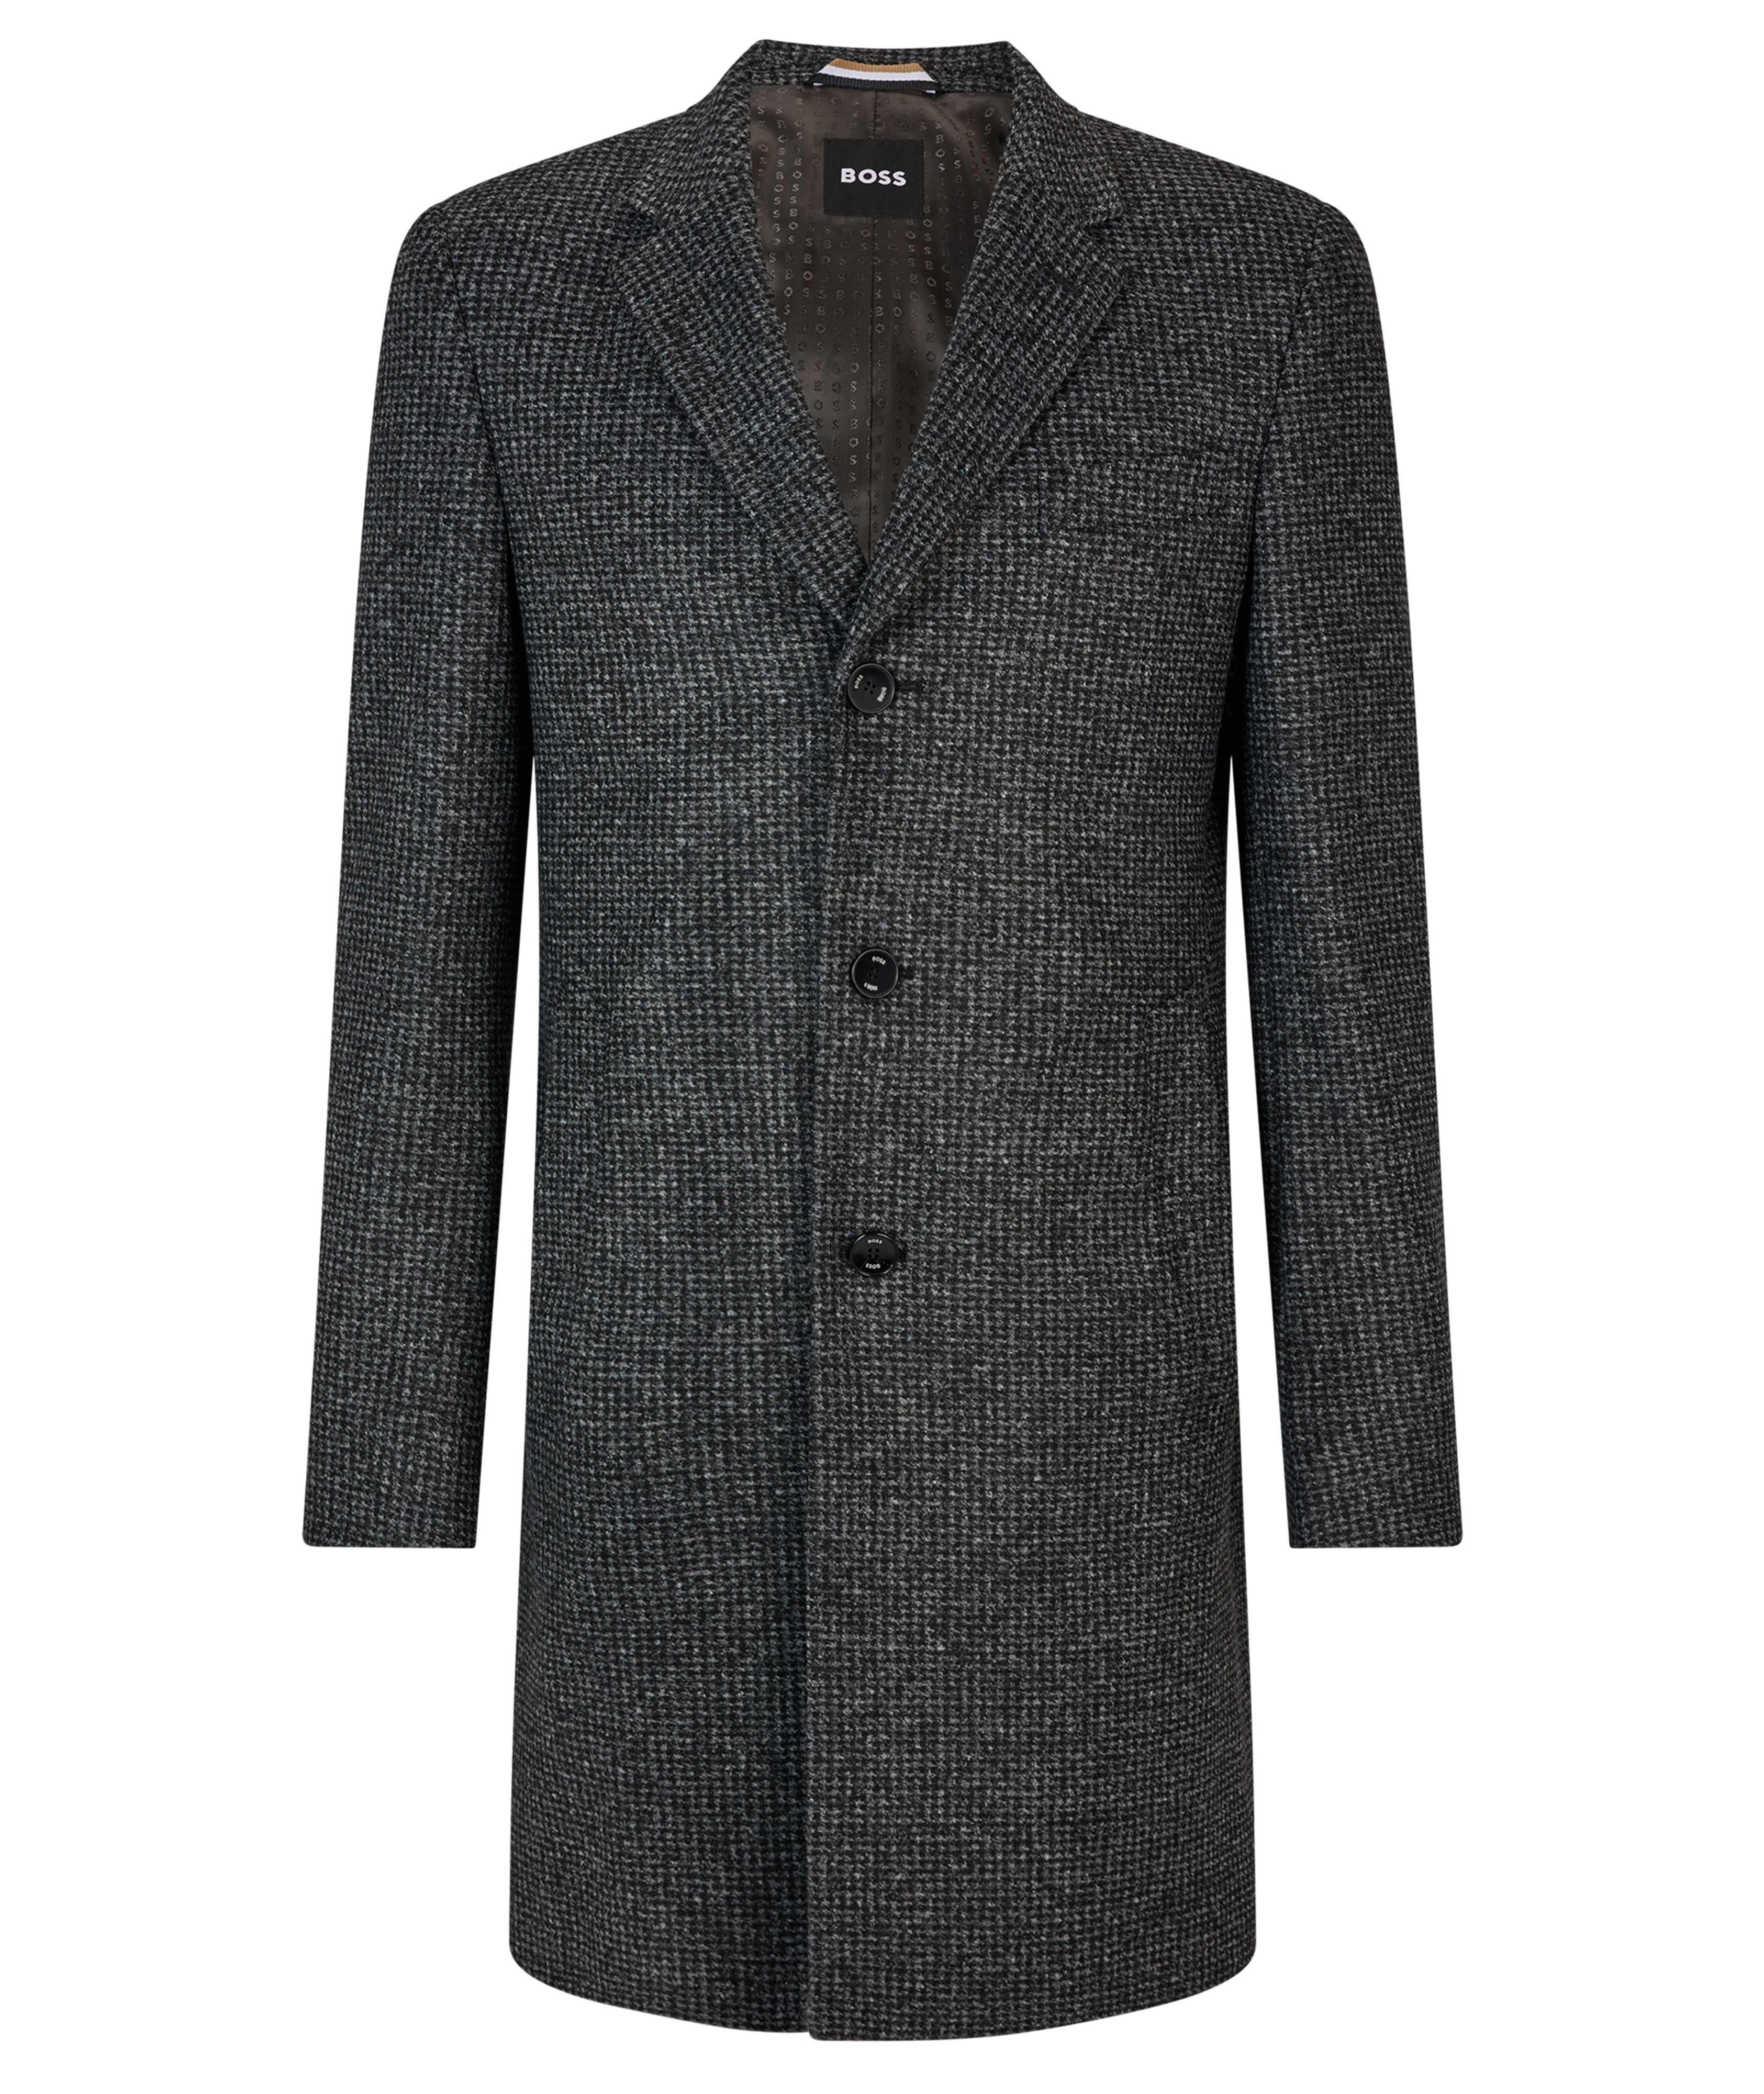 Slim-Fit Patterned Stretch Fabric Coat image 0